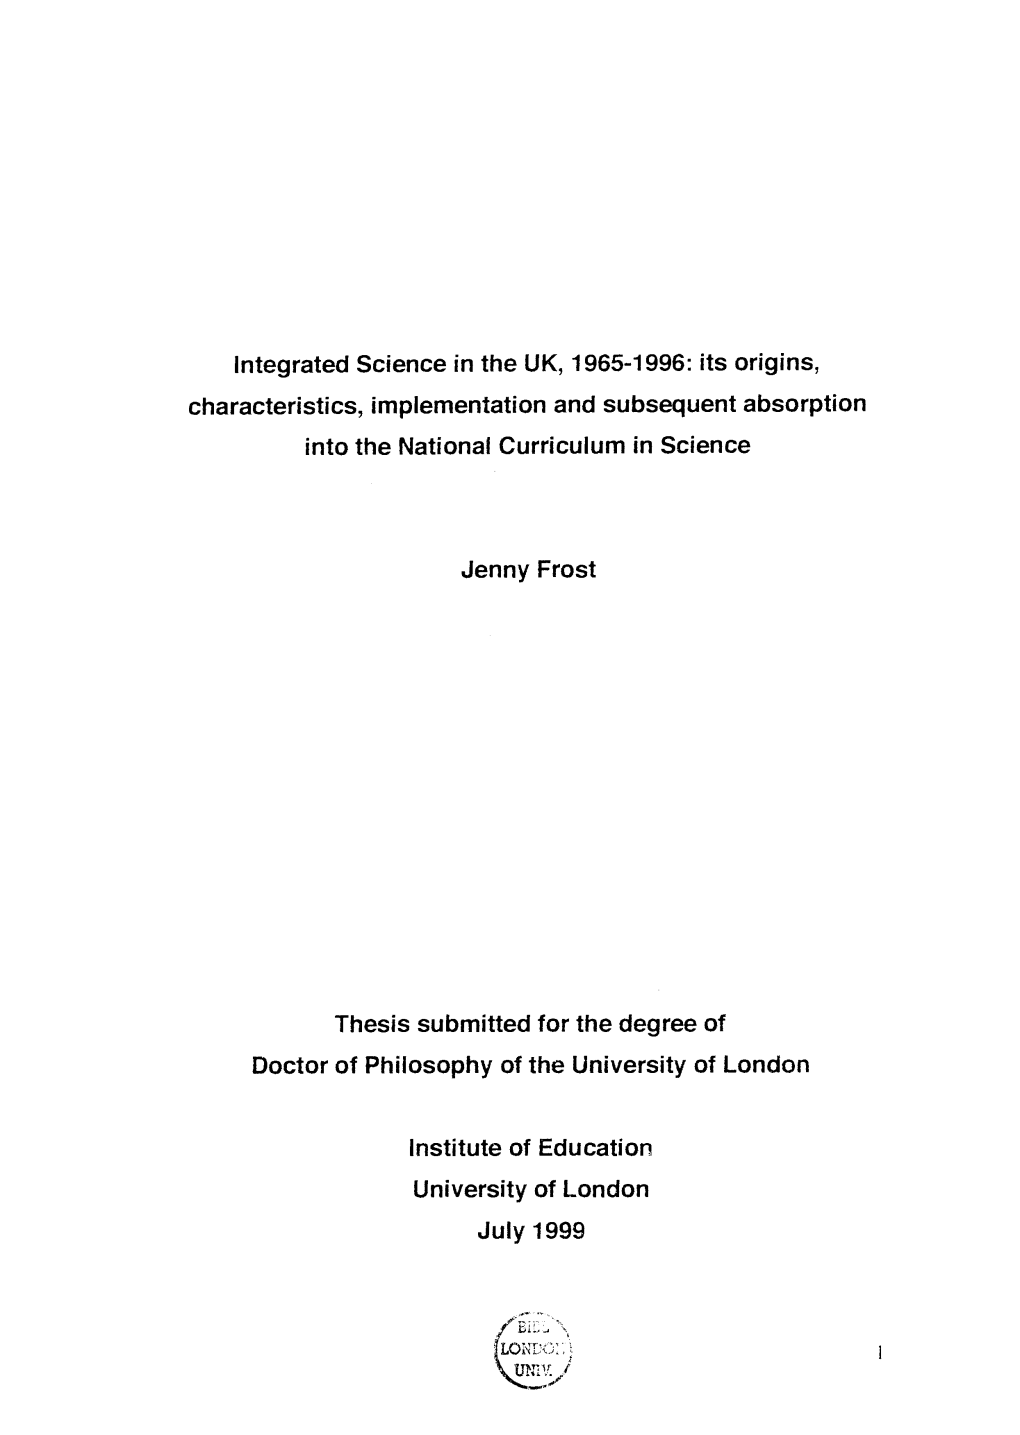 Integrated Science in the UK, 1965-1996: Its Origins, Characteristics, Implementation and Subsequent Absorption Into the National Curriculum in Science